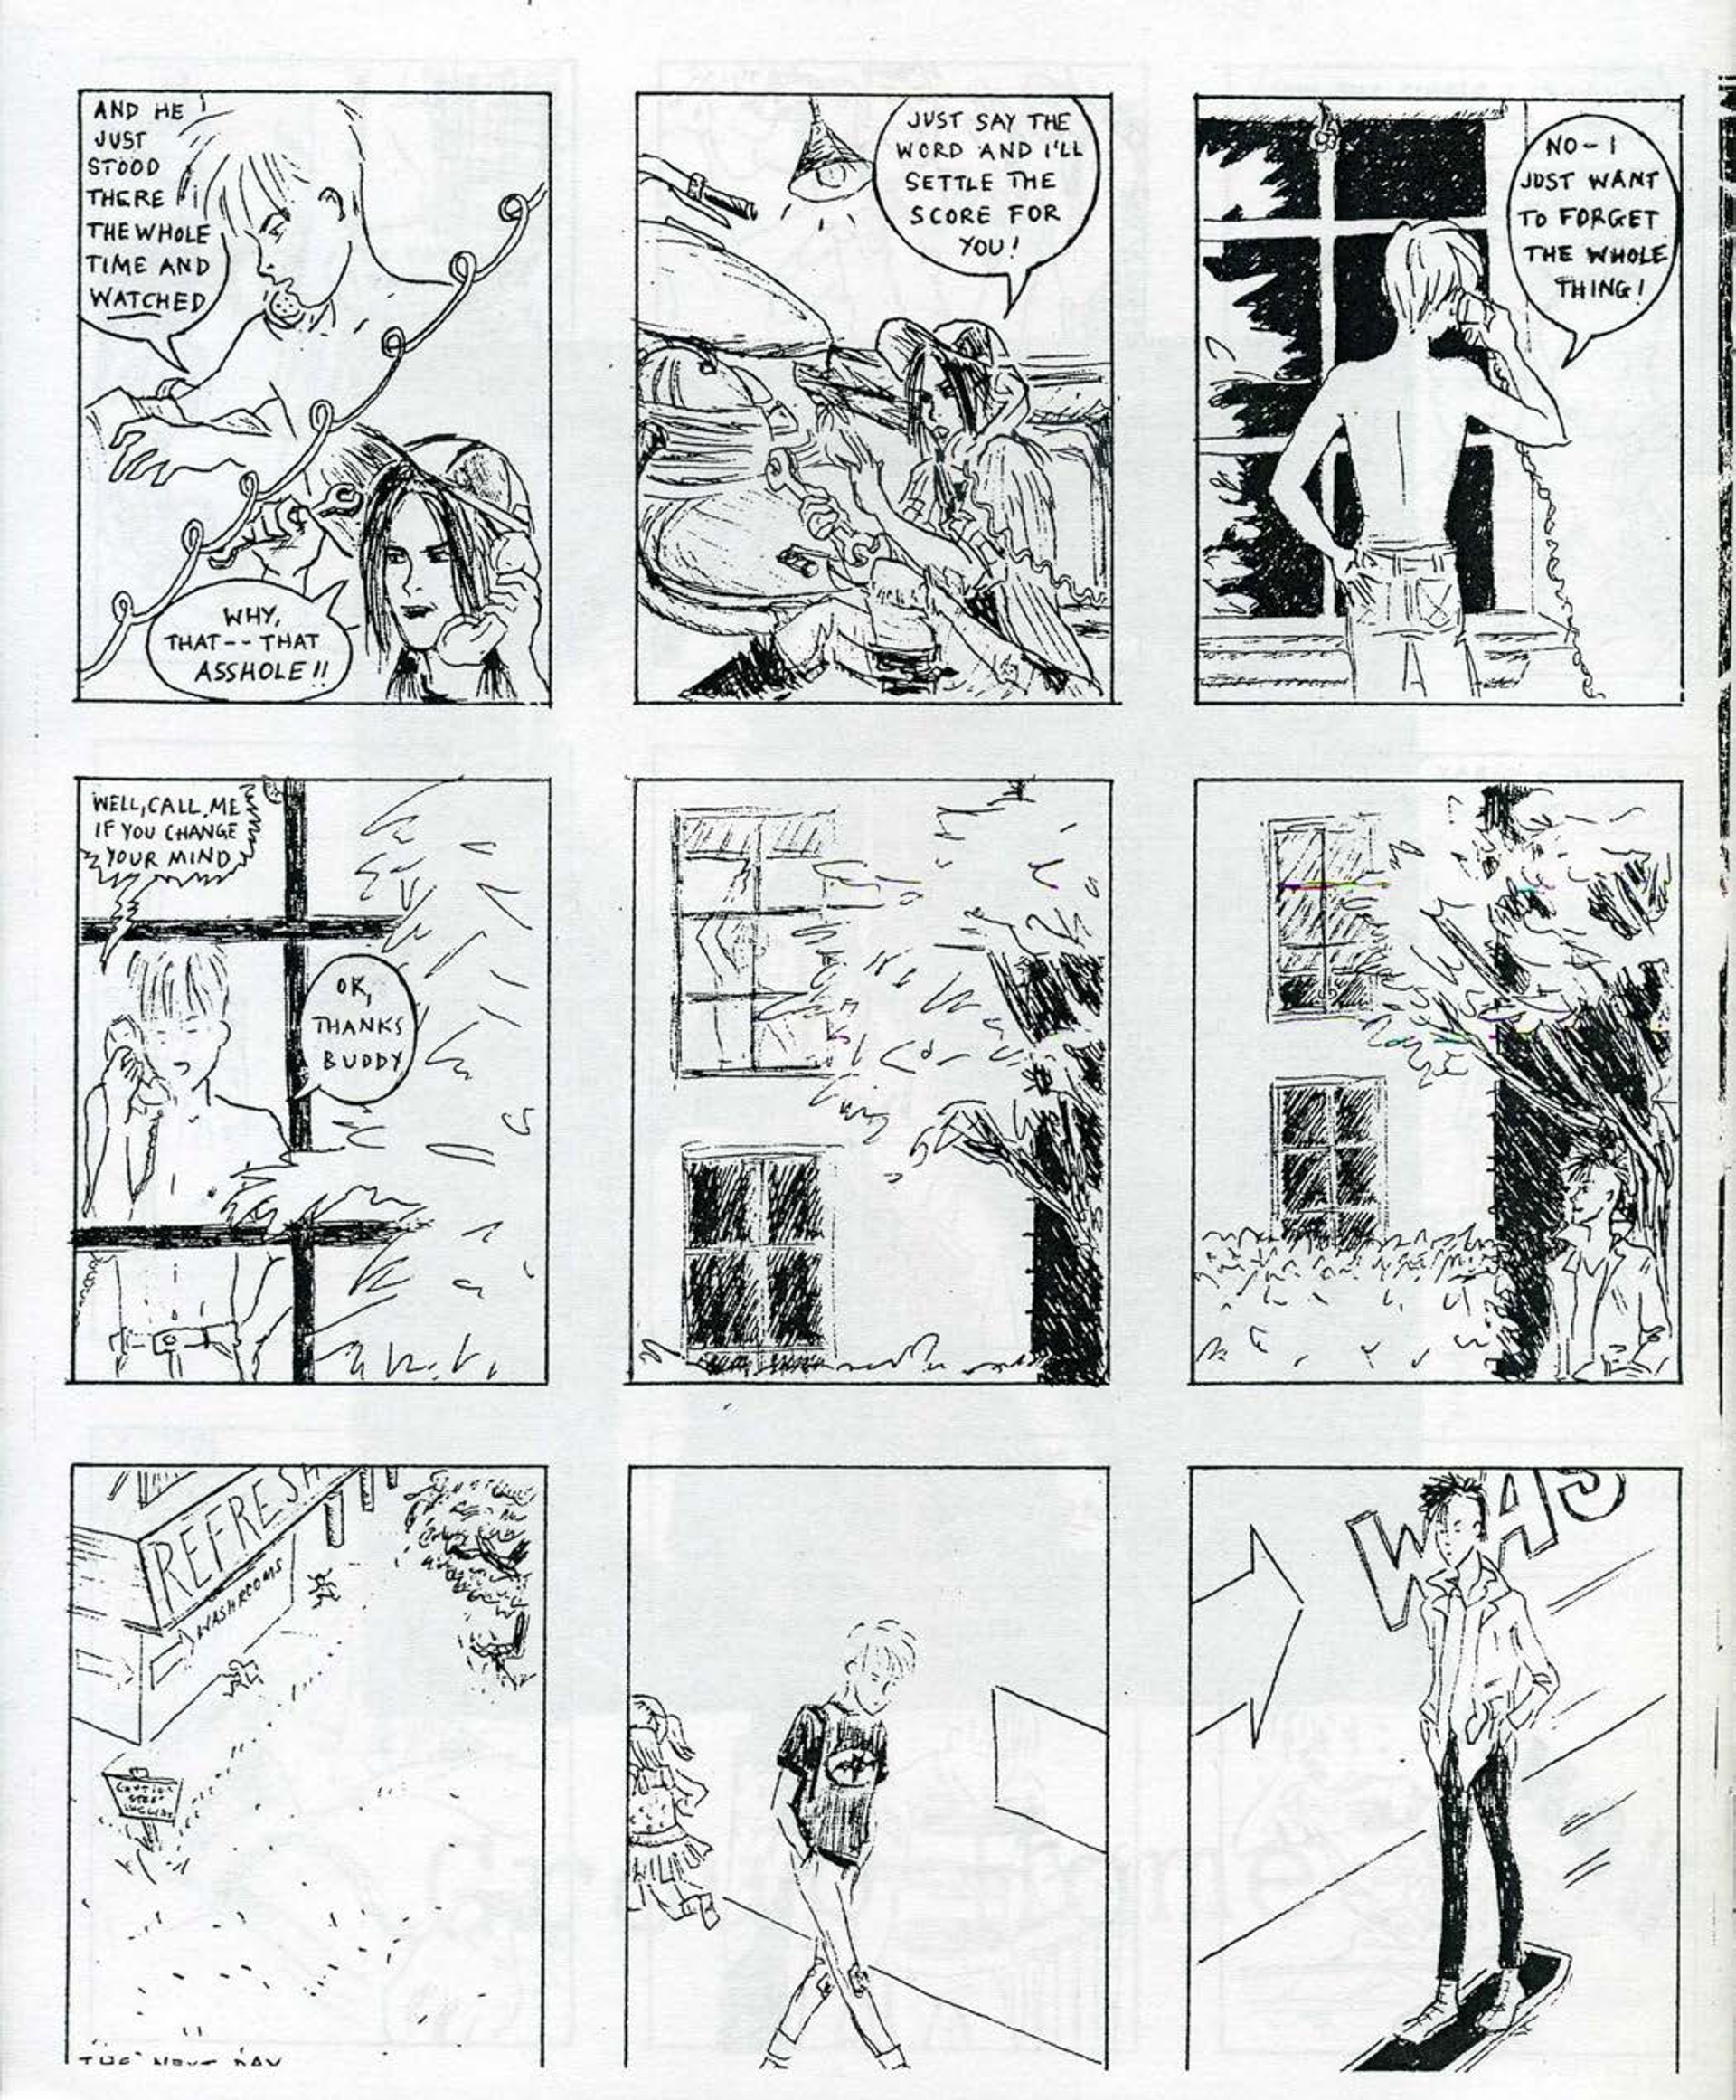 Selected excerpts from J.D.s issues 1-8, 1985-1991 — Courtesy of the artists.